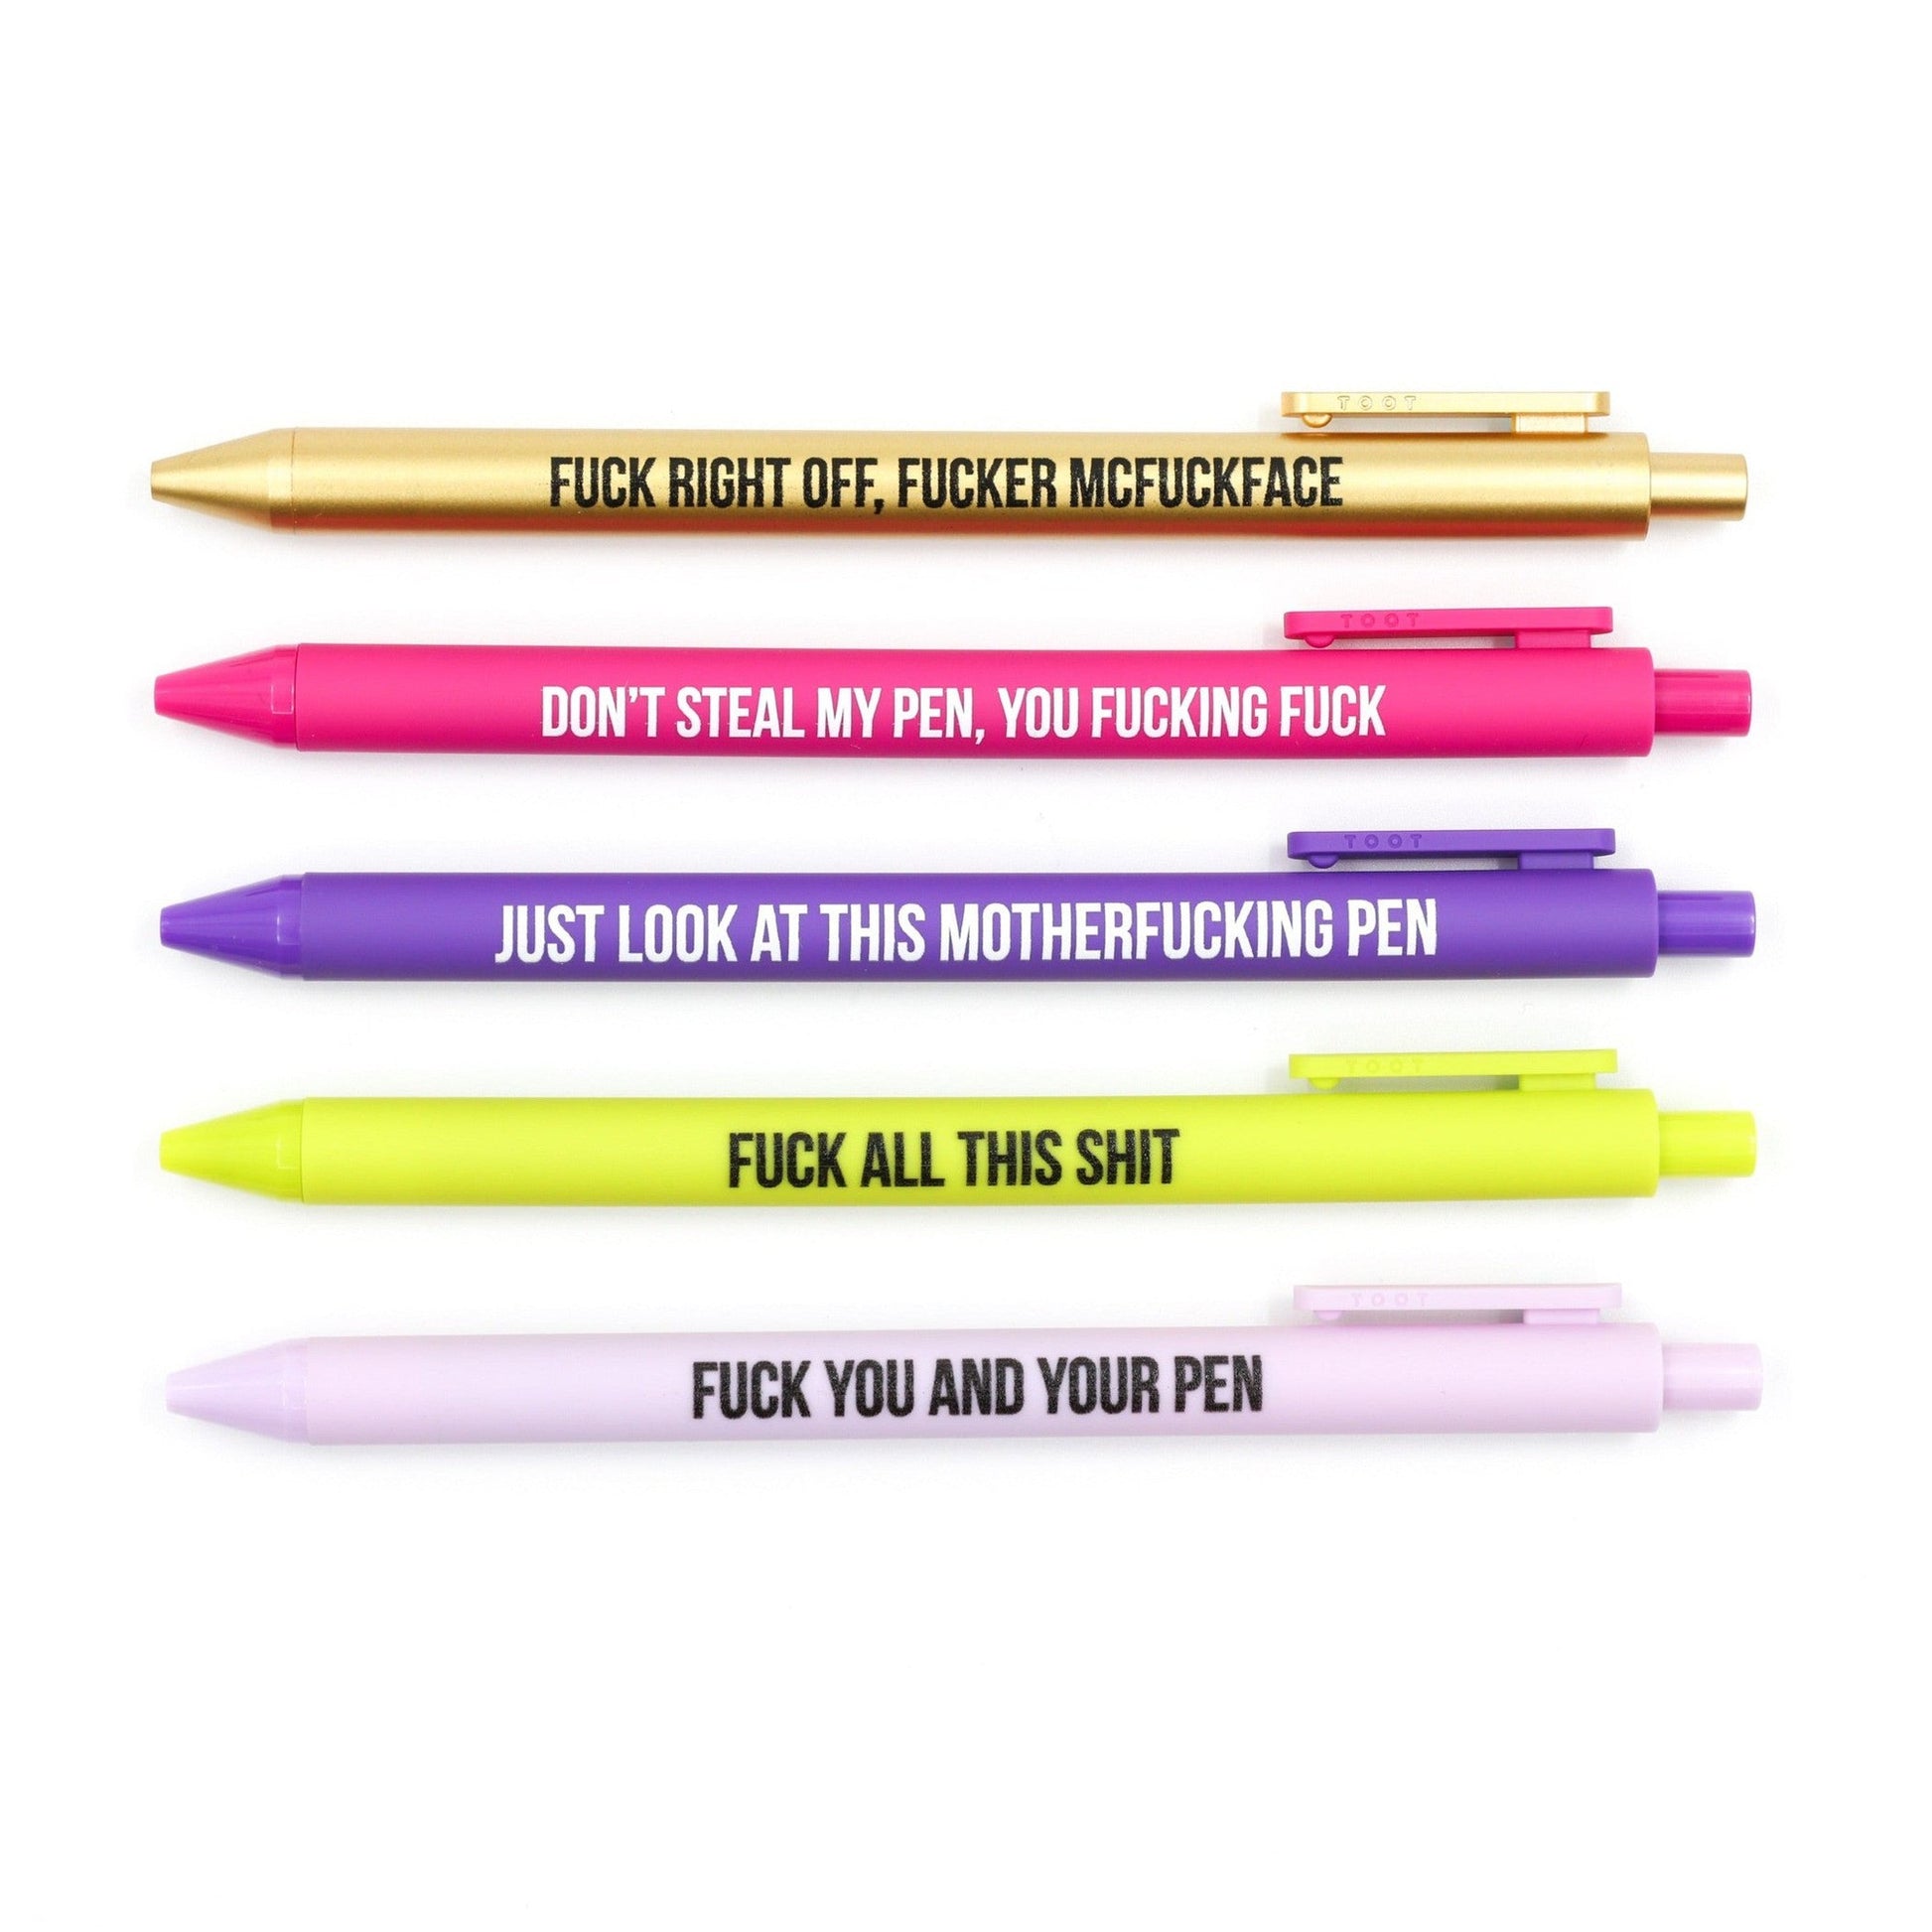 Welcome to the Shit Show Pen Set funny 